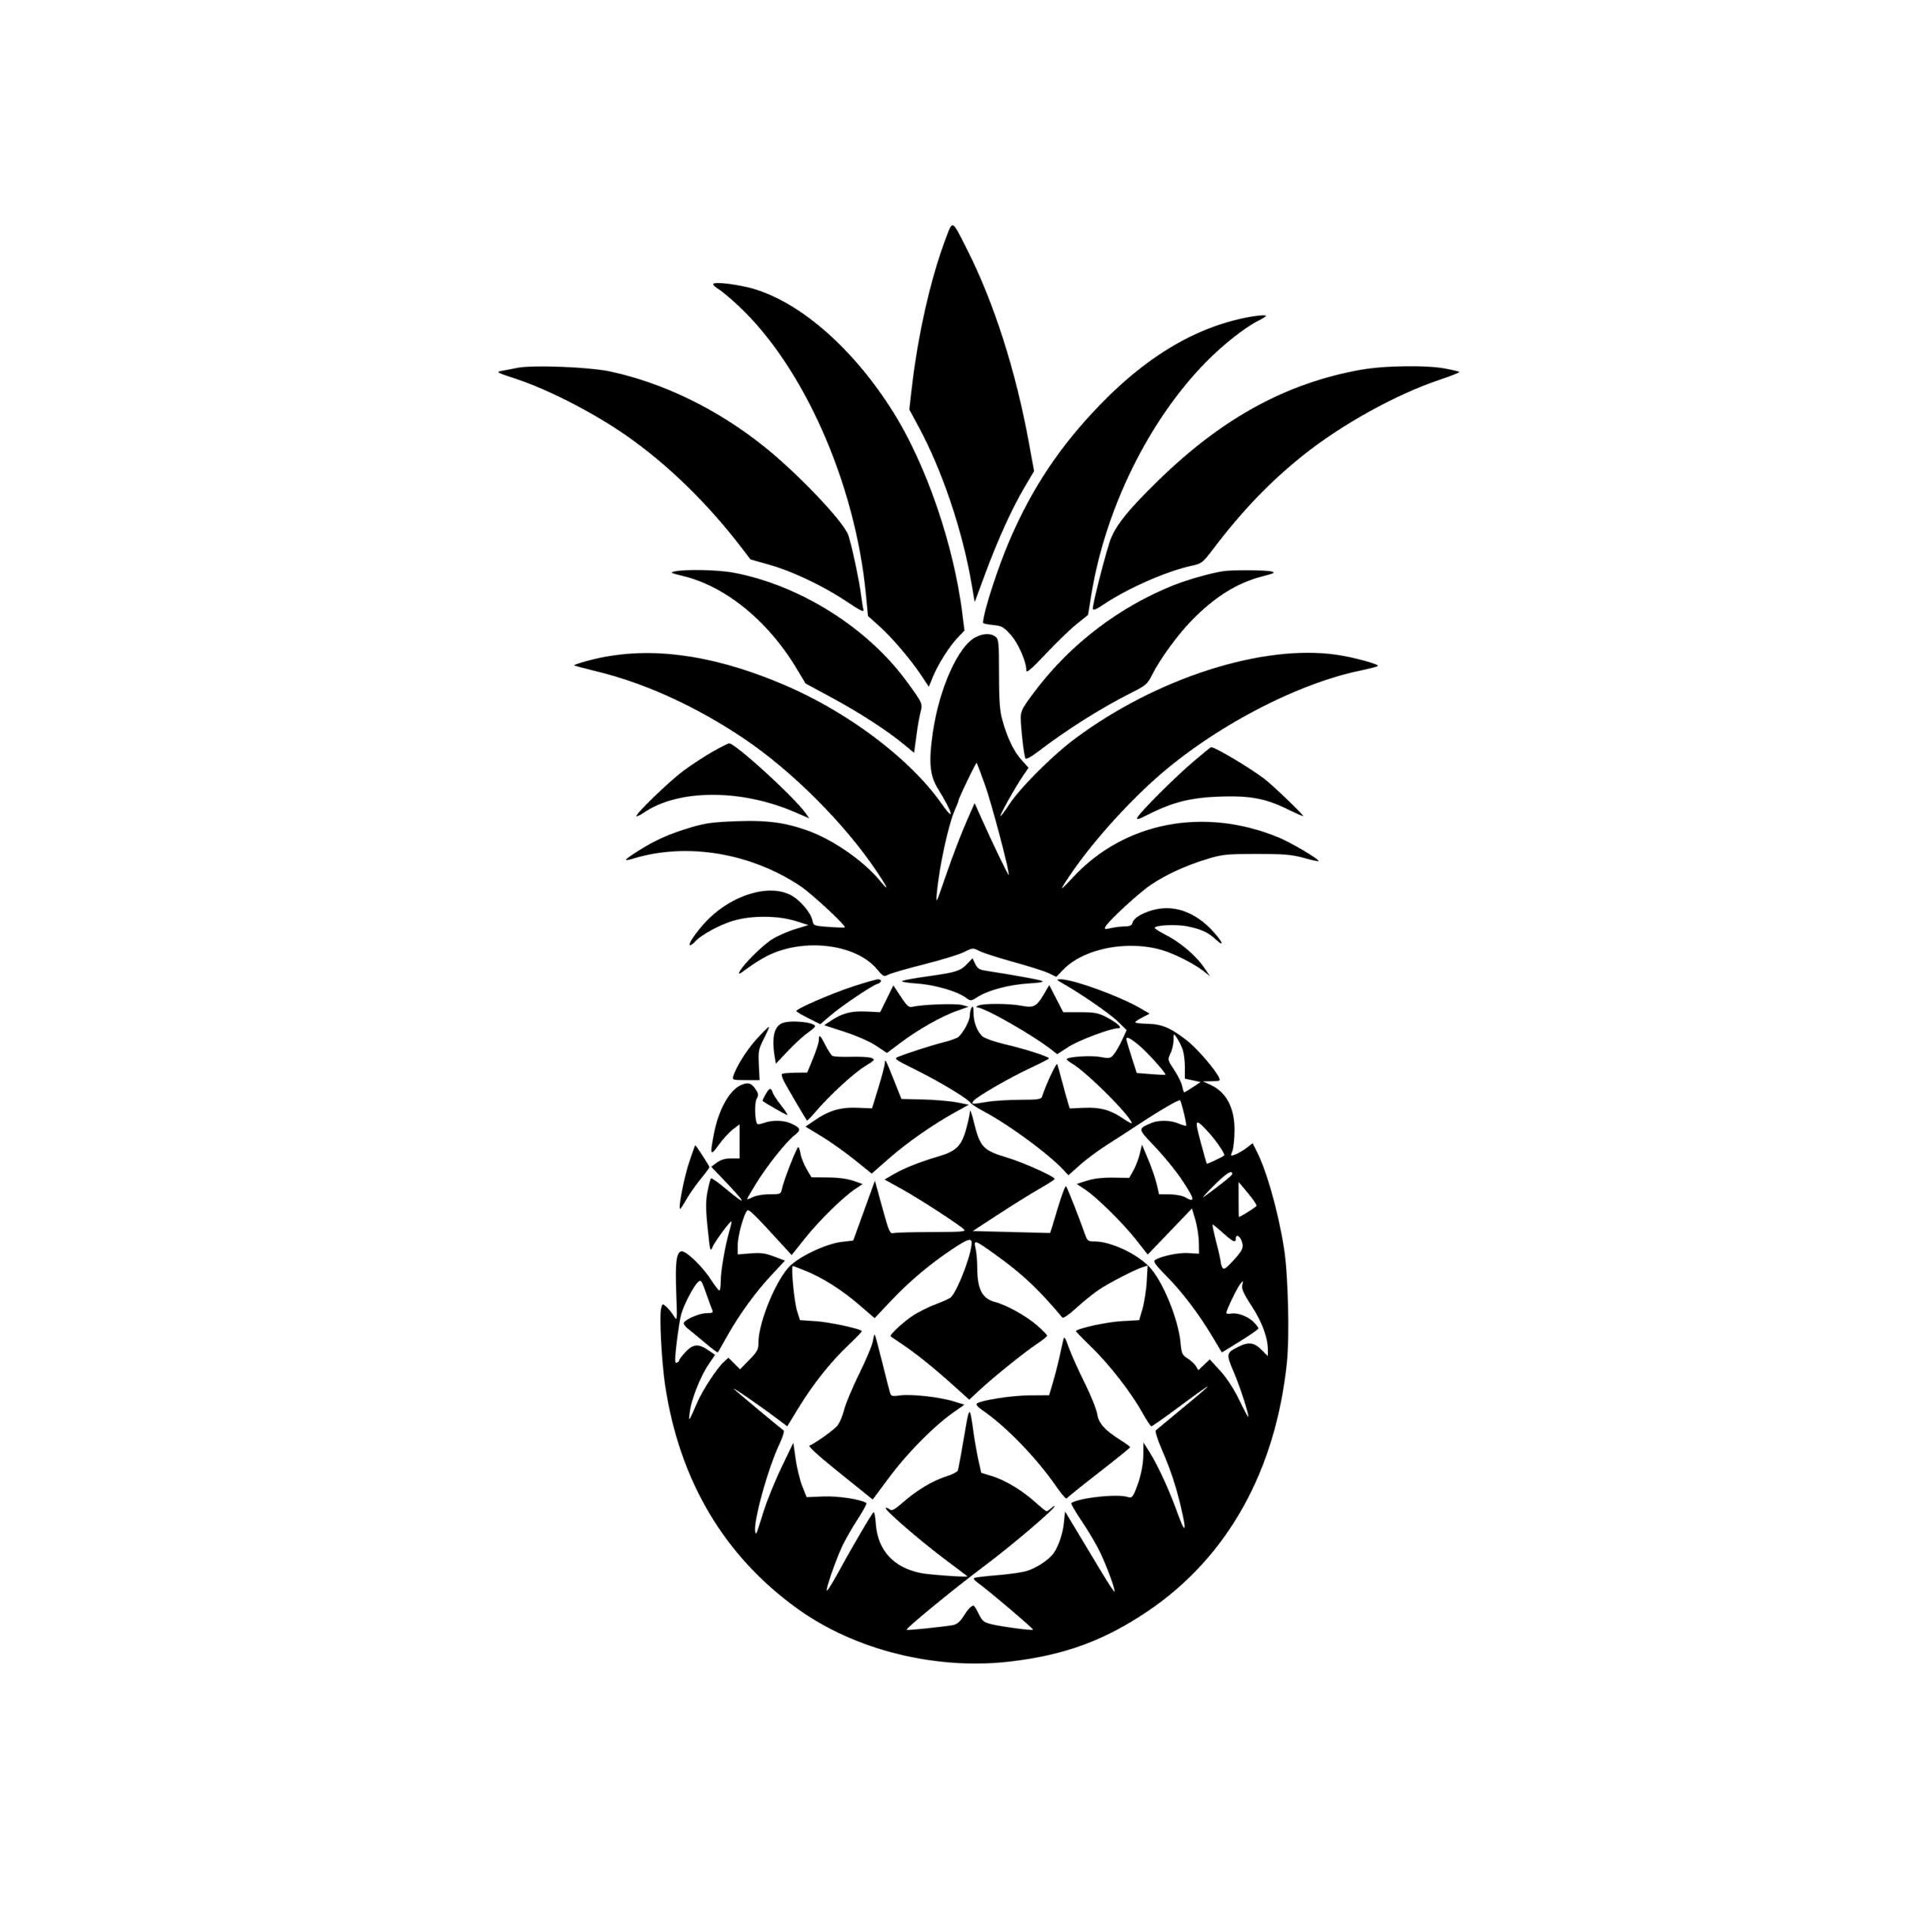 Exotic Pineapple SVG Image for Cricut, Silhouette, Laser Machines